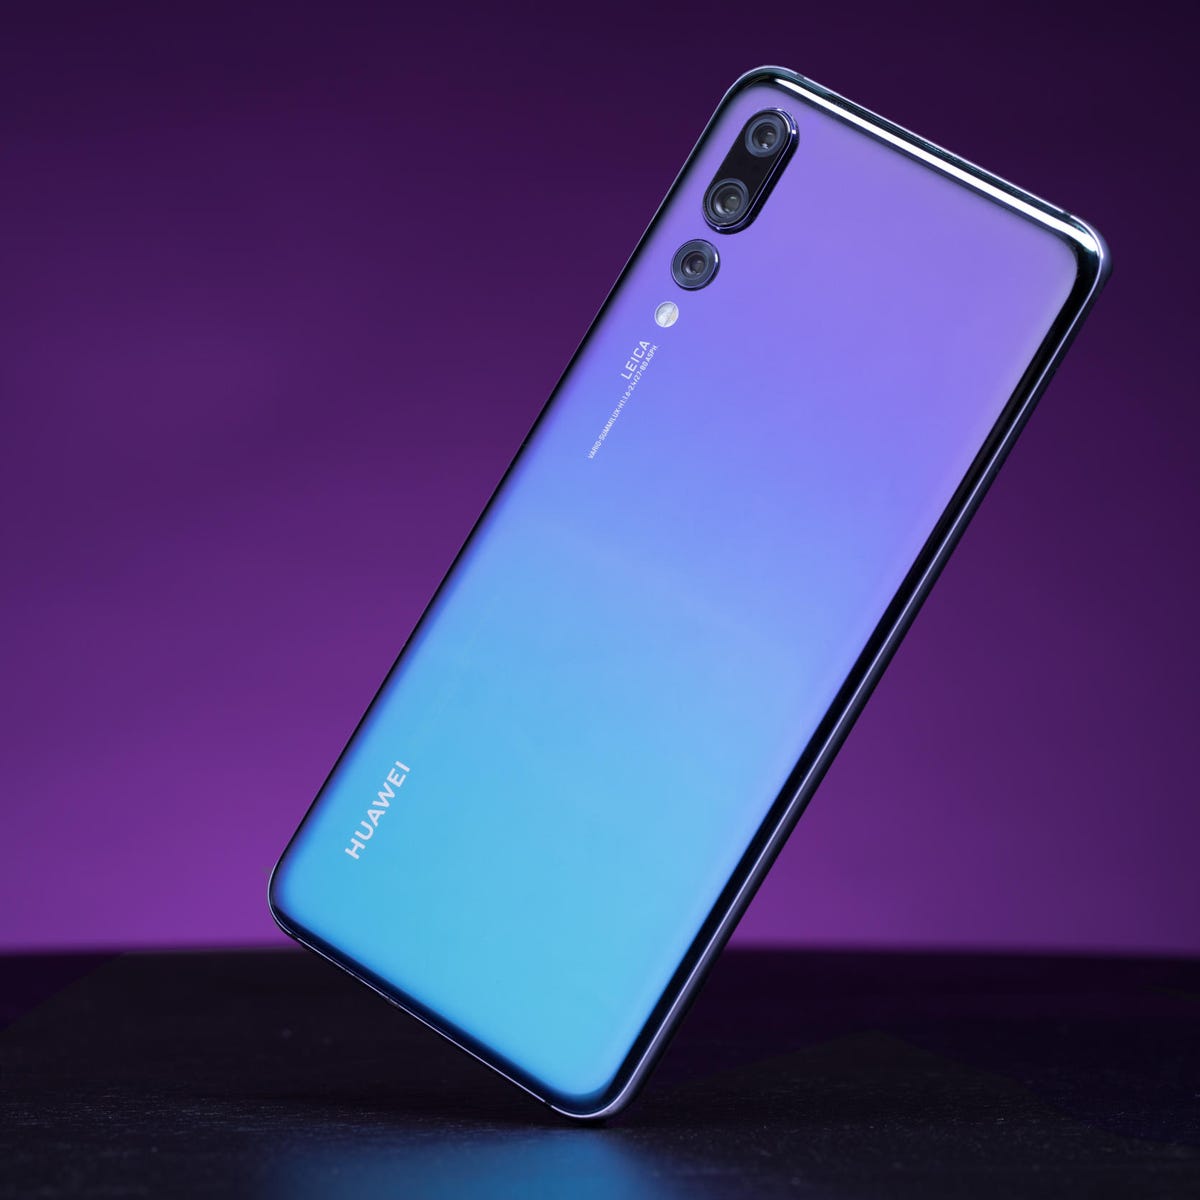 Huawei P20 Pro review: The new low-light photo champ - CNET